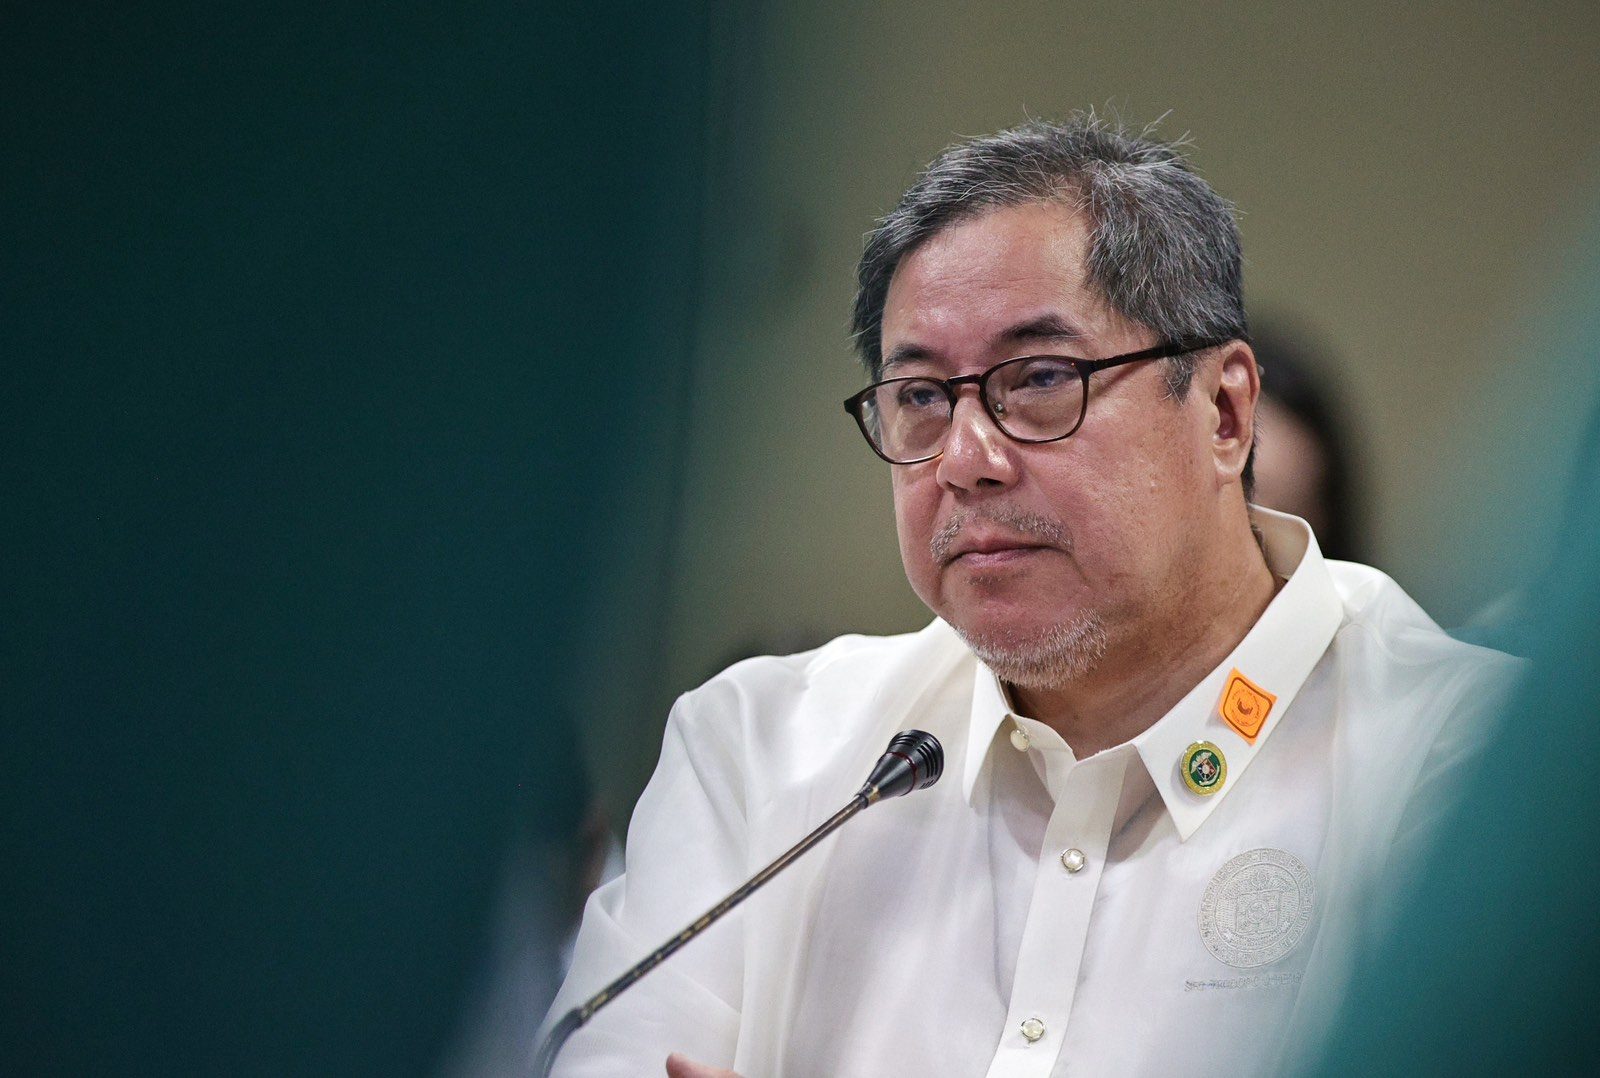 CA recommends Herbosa’s appointment as DOH secretary